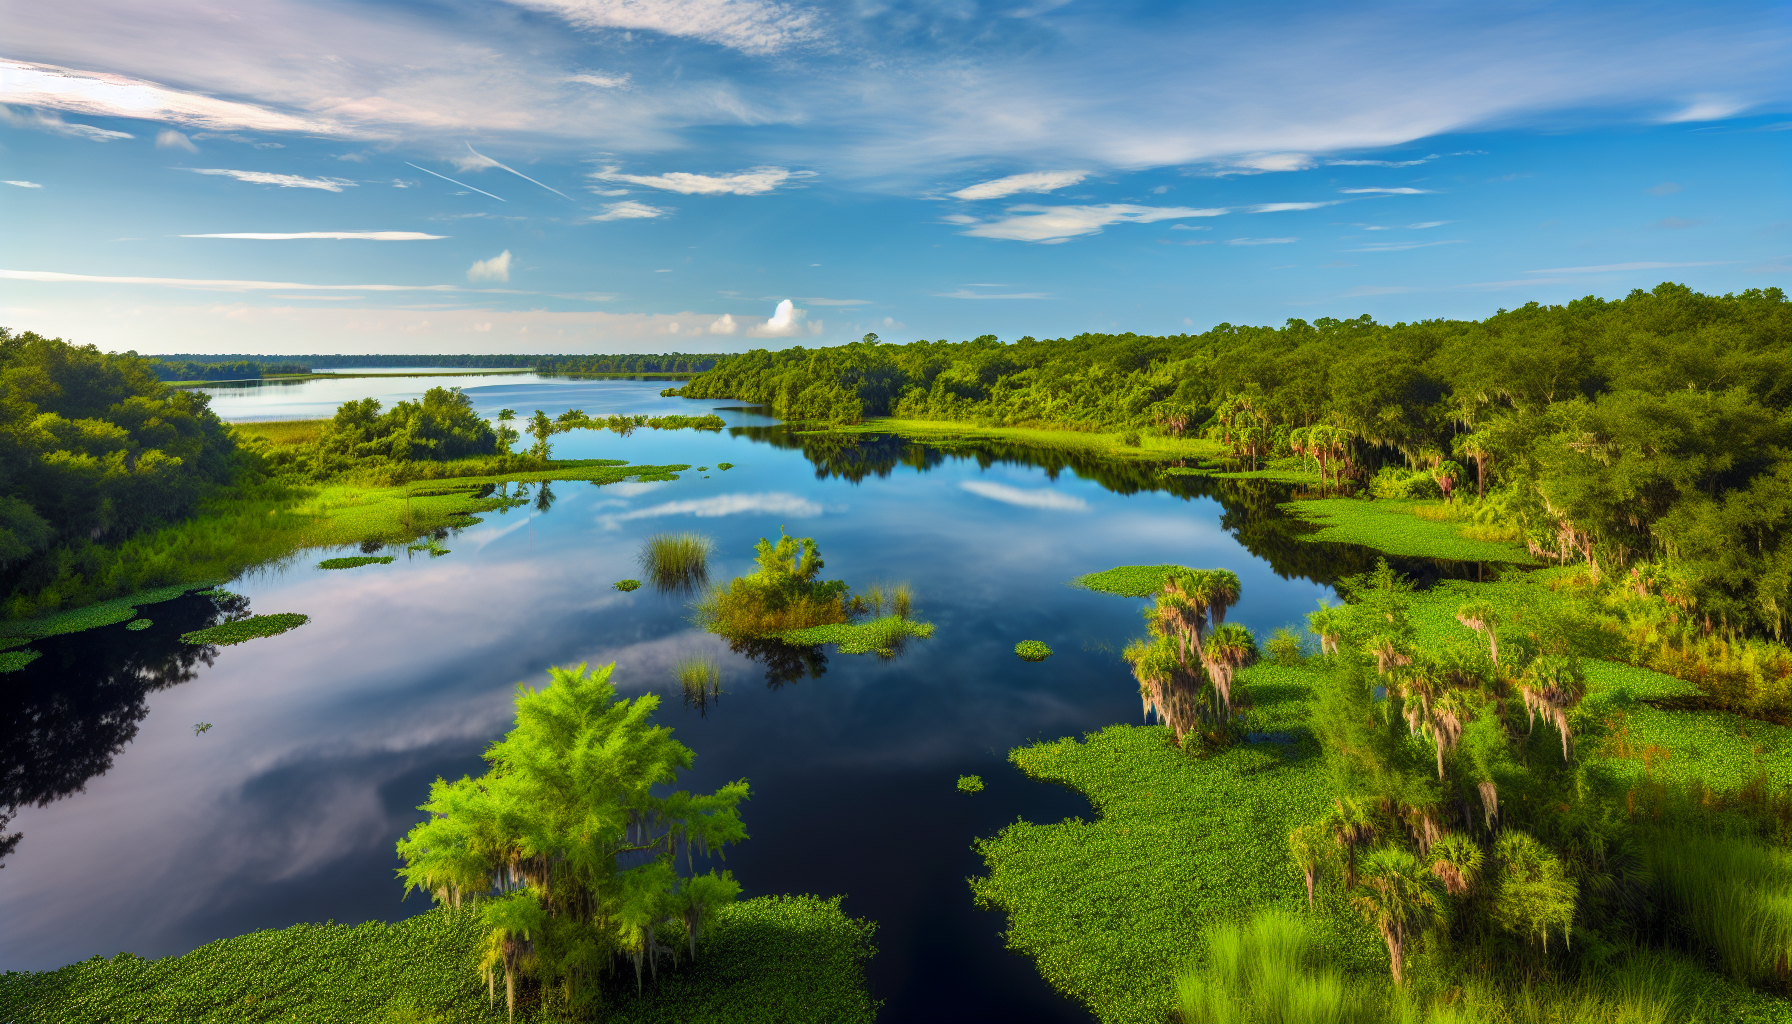 A serene lake surrounded by lush greenery, representing the beauty of the Kissimmee Chain of Lakes